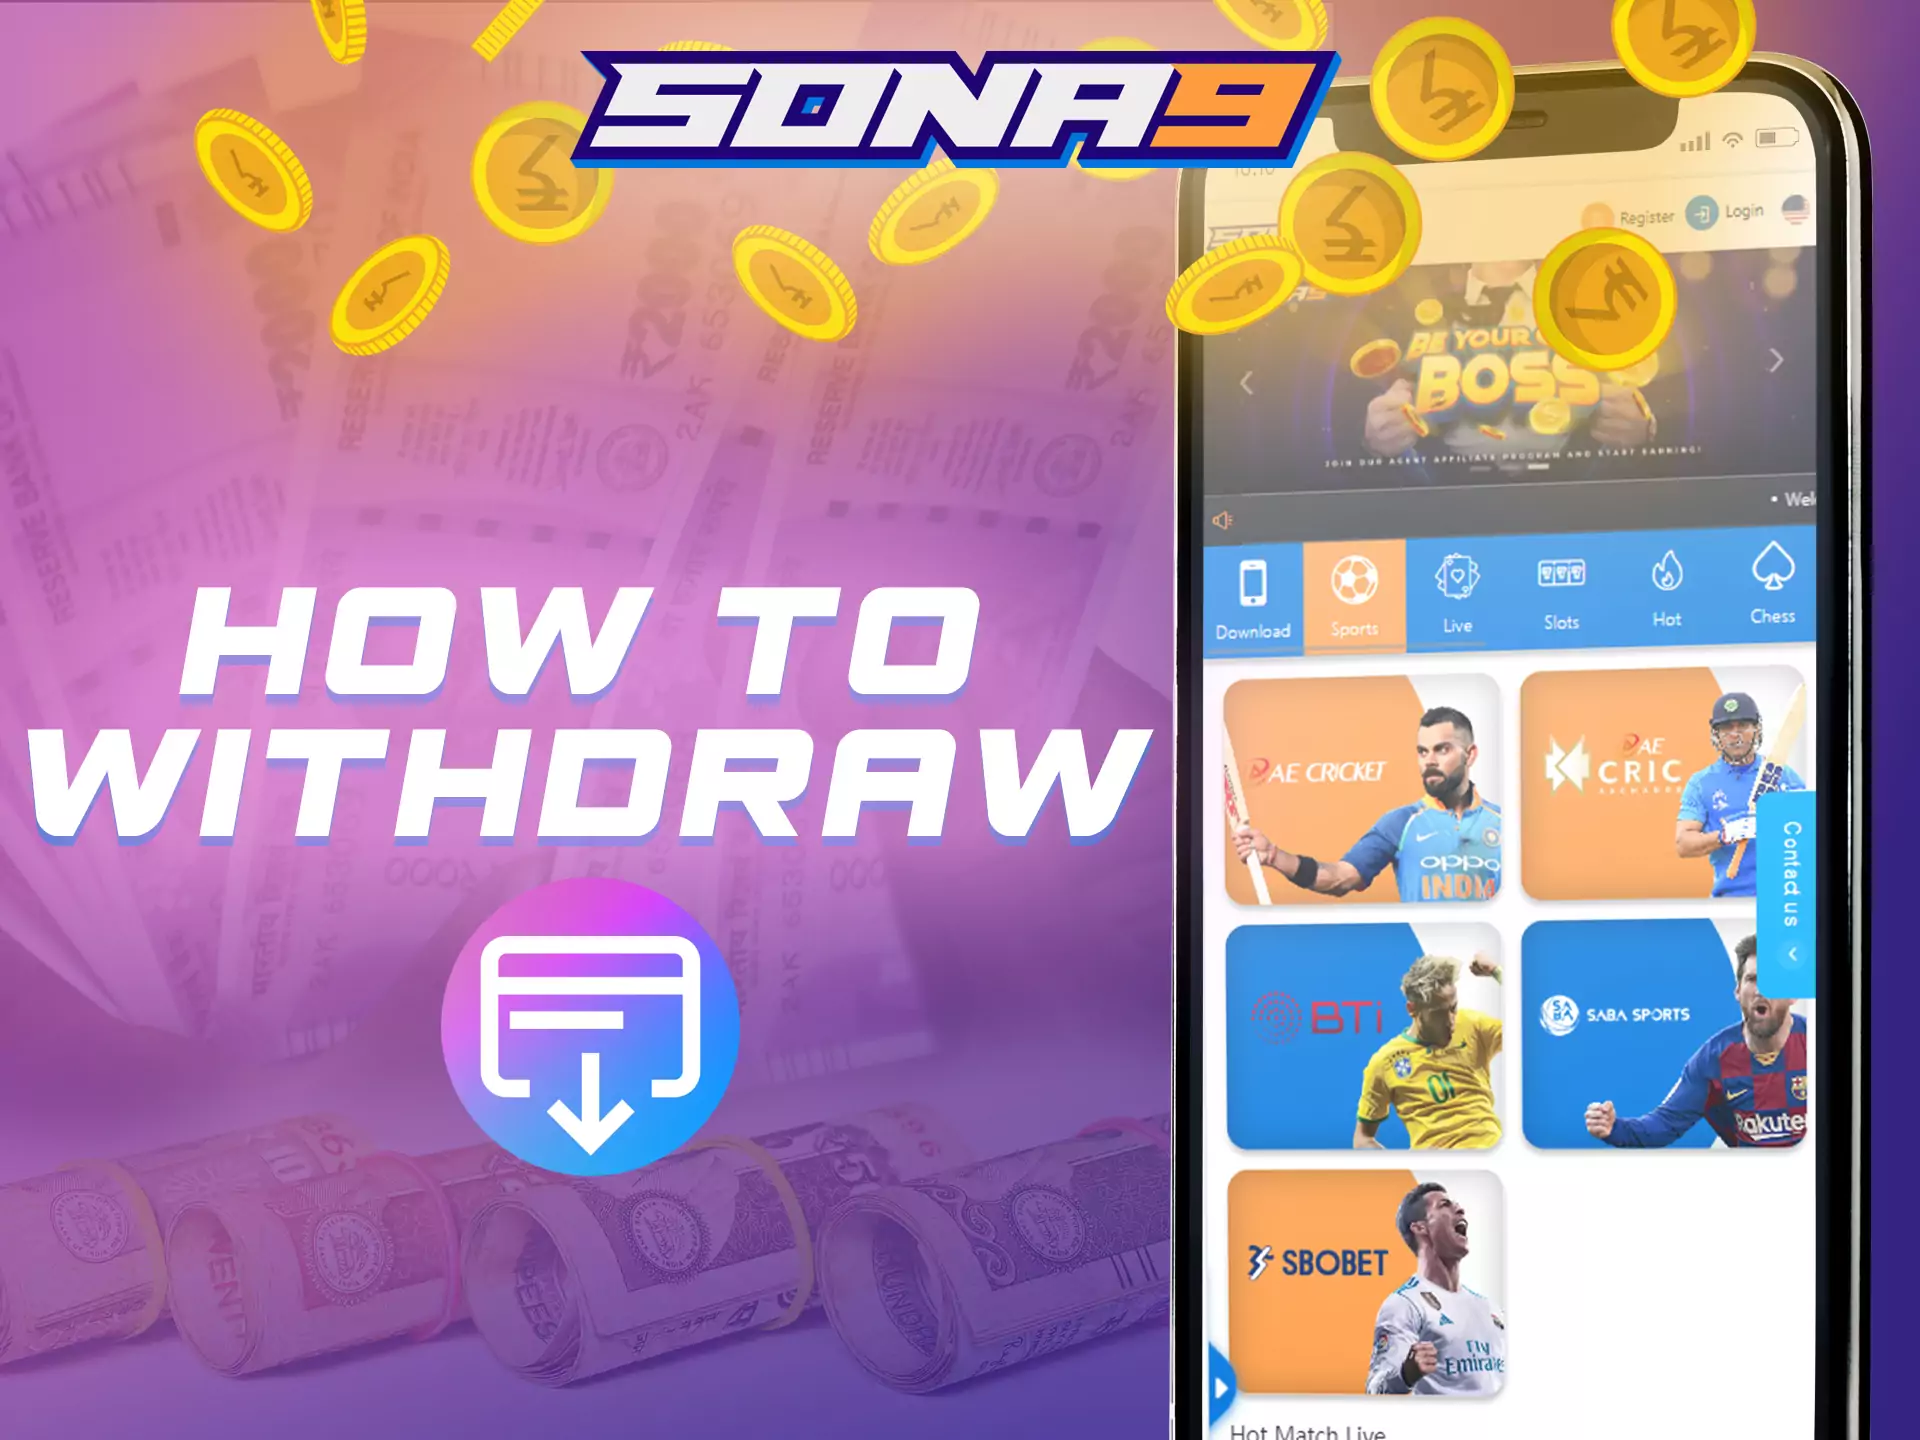 Withdraw your money right in the Sona9 app.